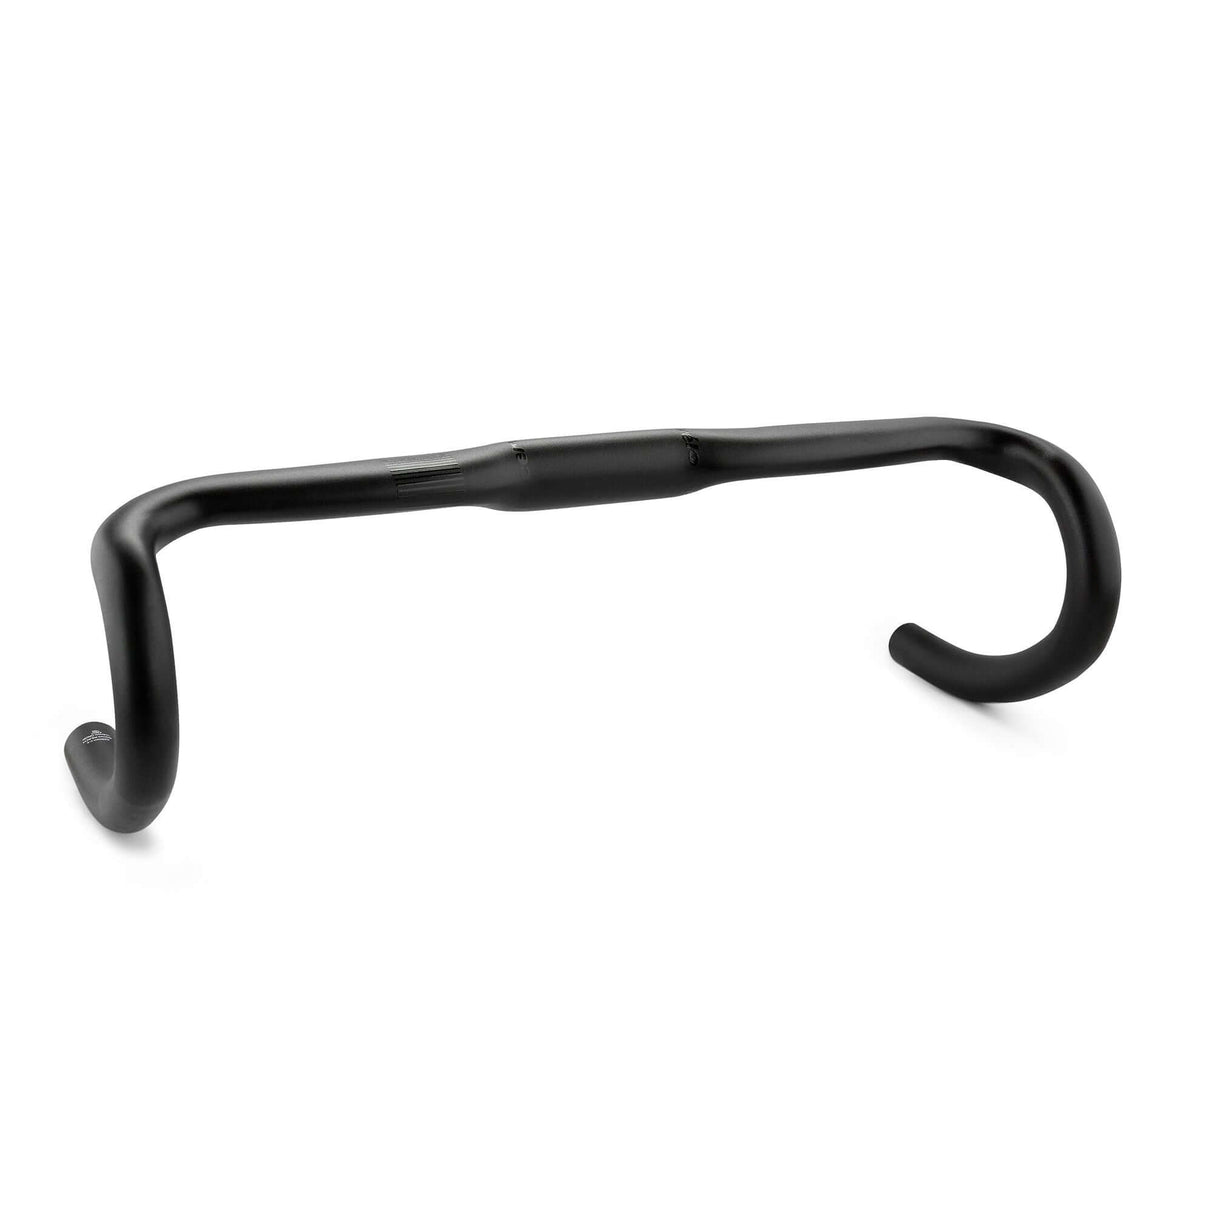 Cervelo AB07 Alloy Handlebar | Strictly Bicycles